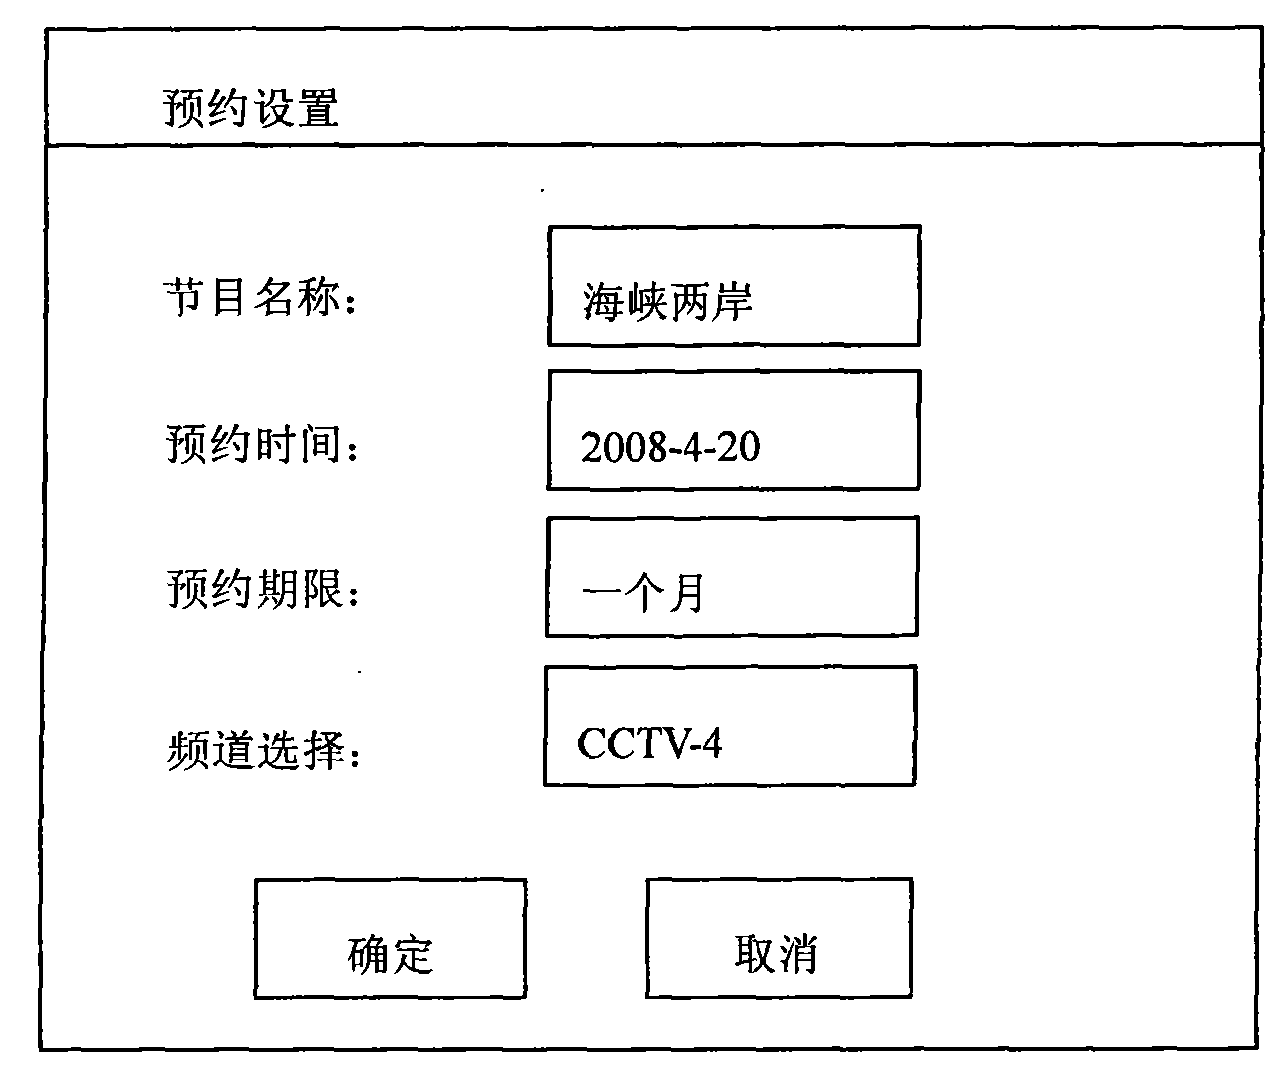 Method and system for reserving television program